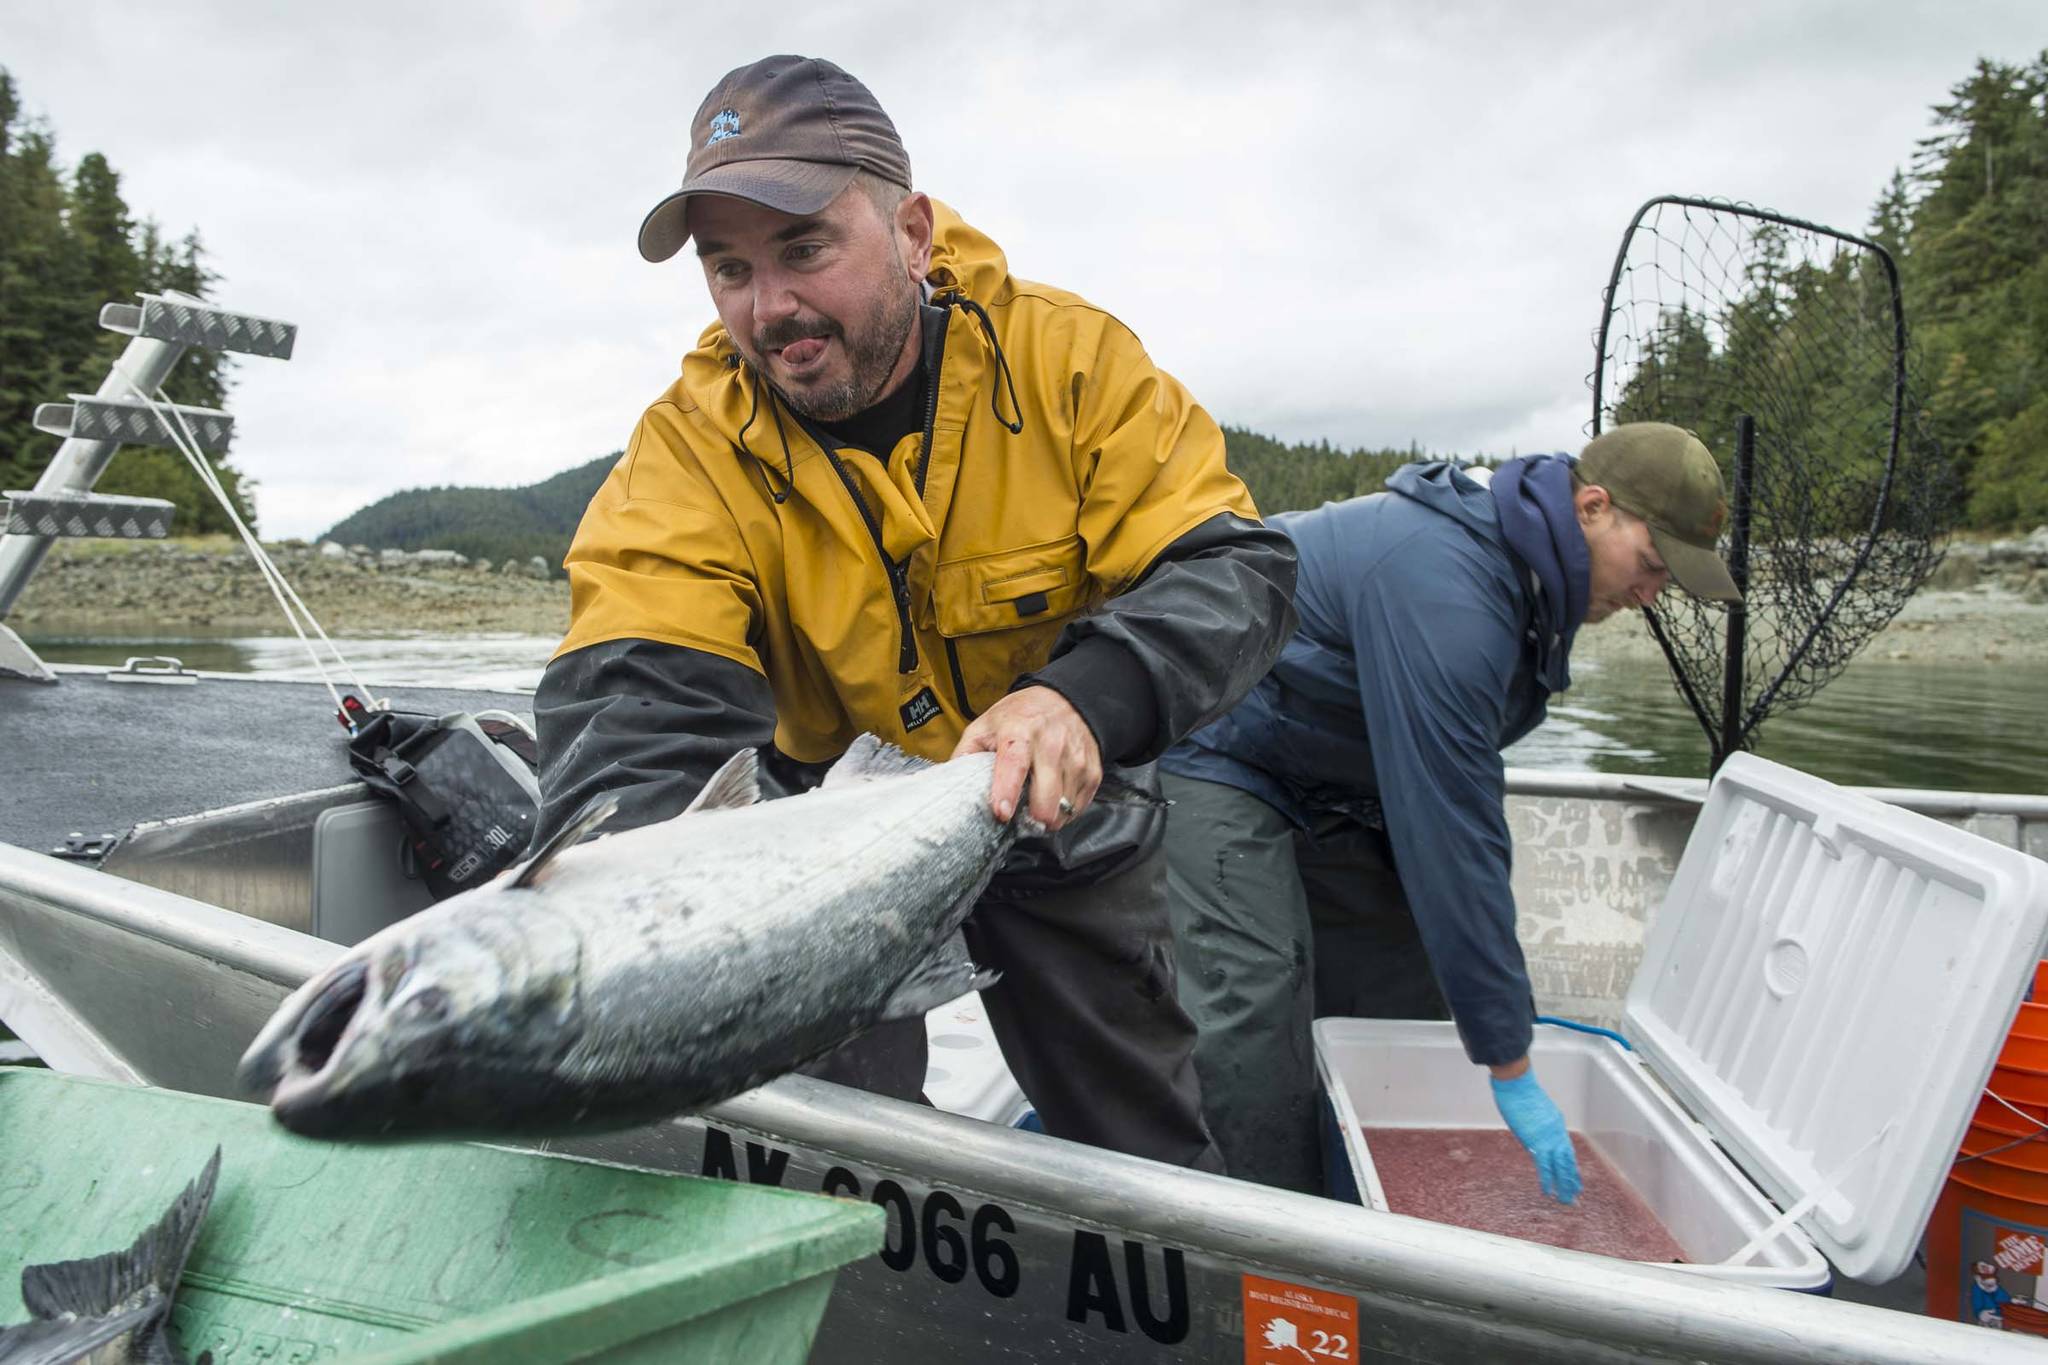 John Bohan, left, and Dusty Riesterer offload a dozen coho at the Golden North Salmon Derby’s station at Amalga Harbor on Saturday, Aug. 24, 2019. (Michael Penn | Juneau Empire)